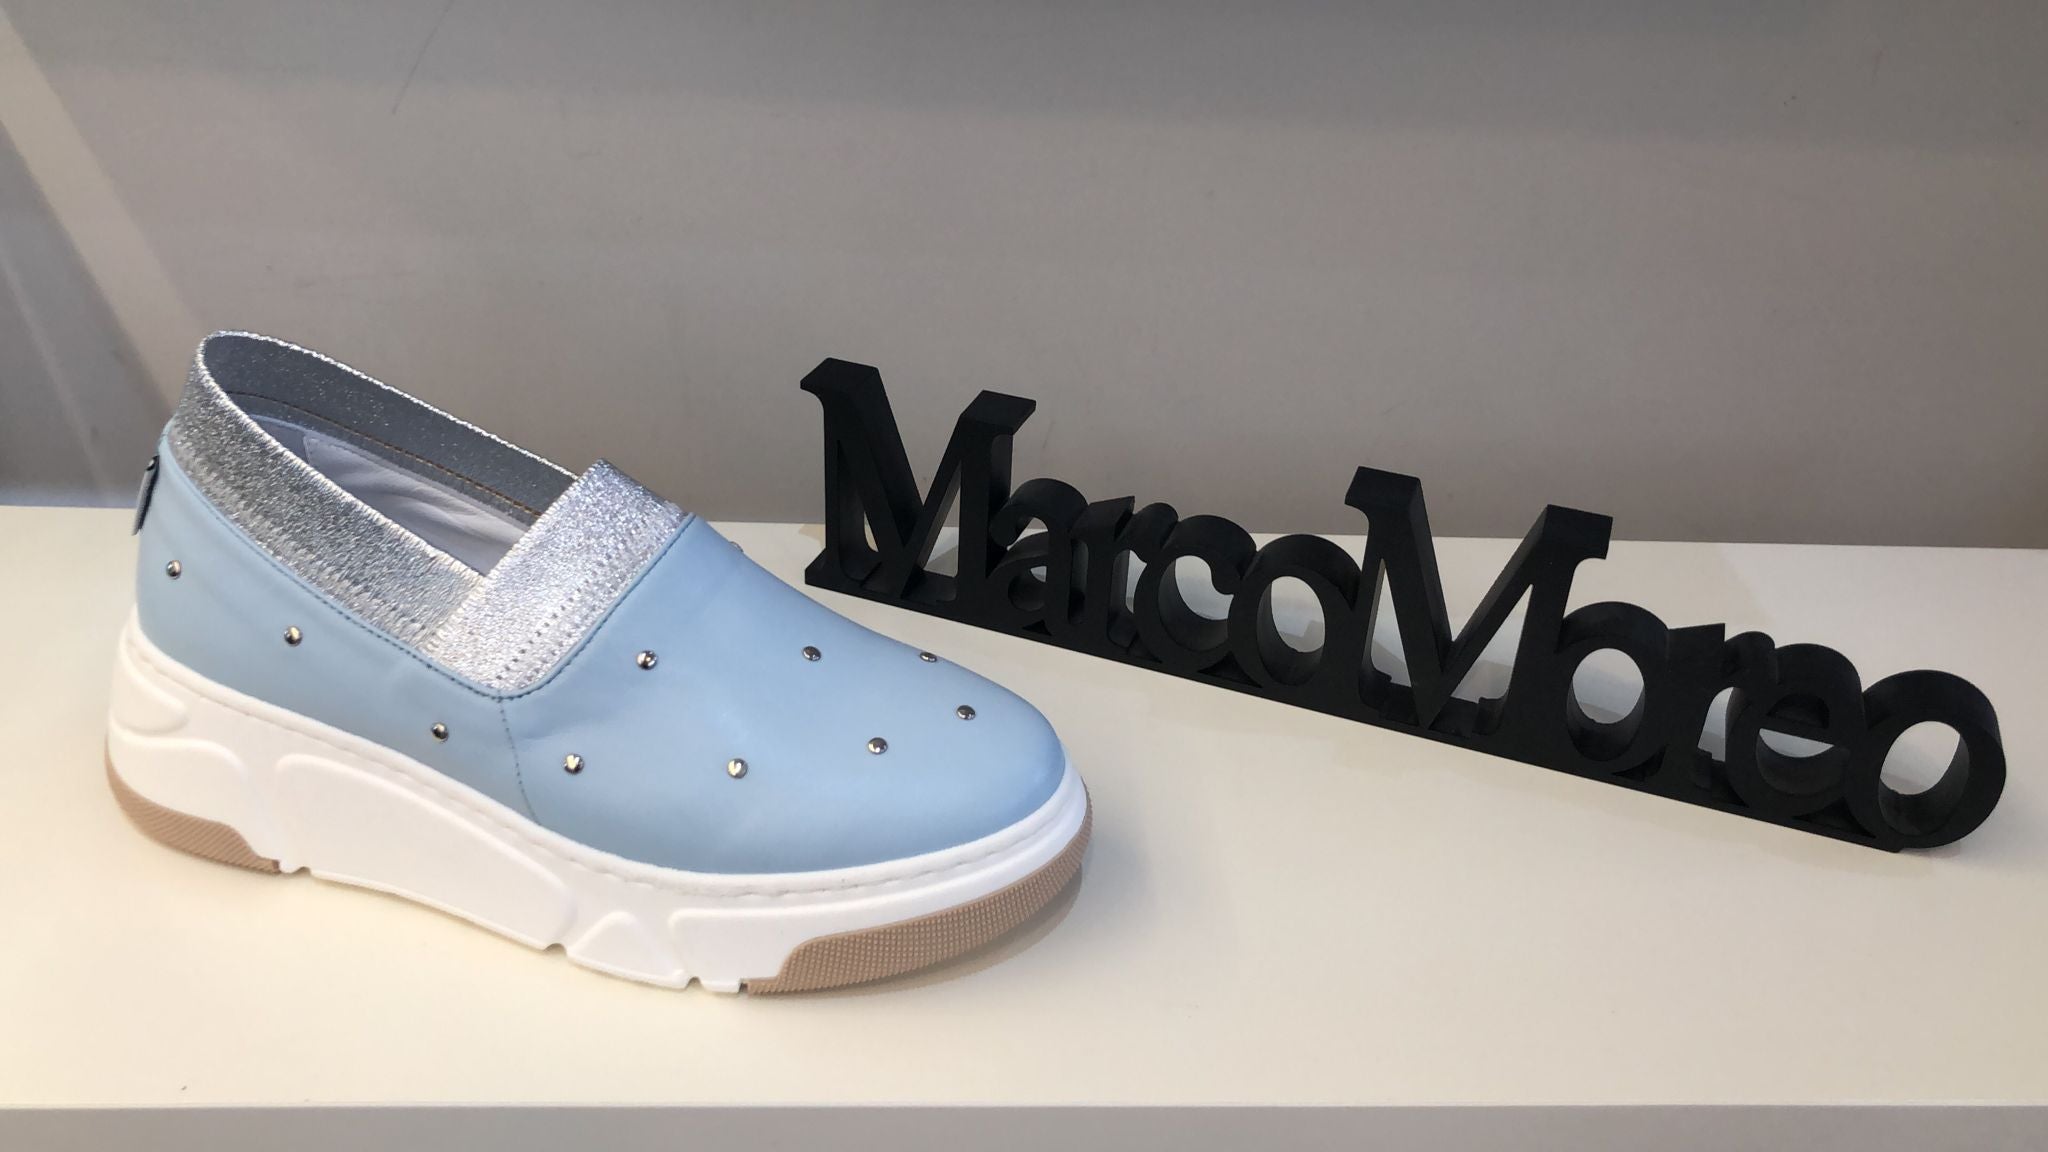 Marco Moreo 24038 Powder blue loafer